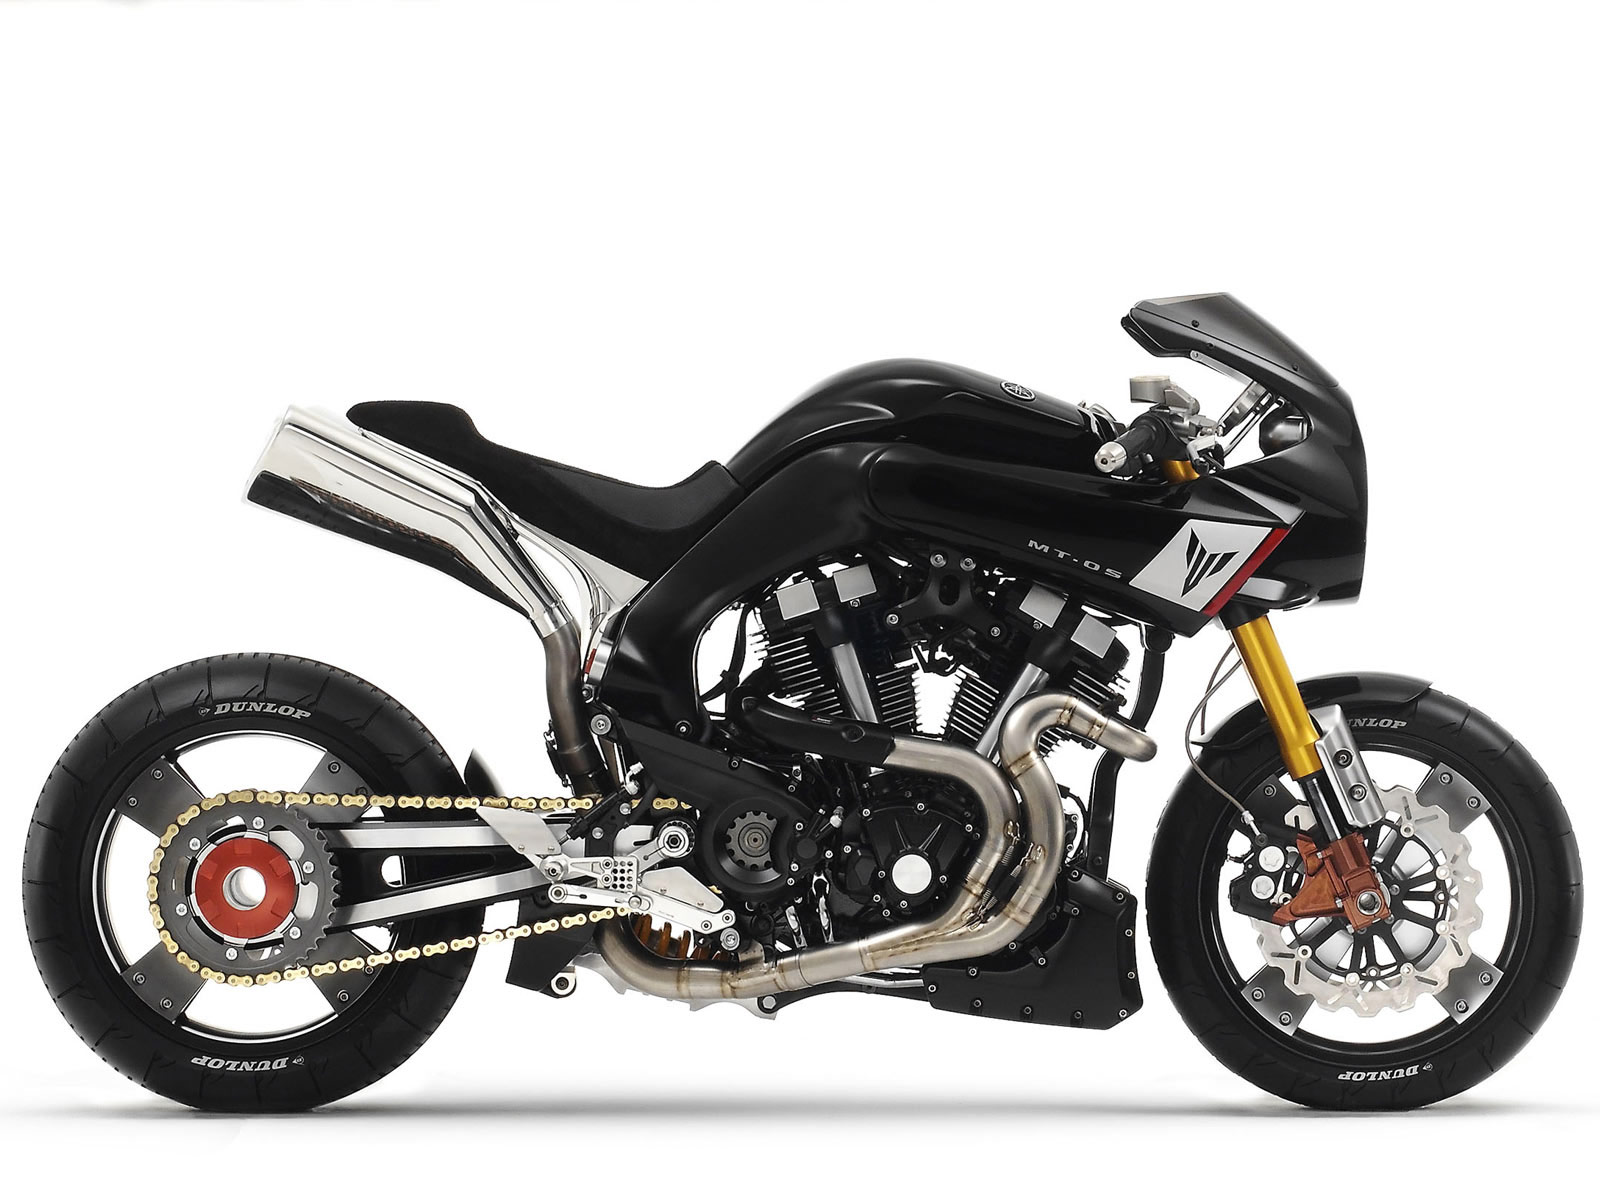 2006 YAMAHA MT-0S Concept Motorcycle pictures, specifications